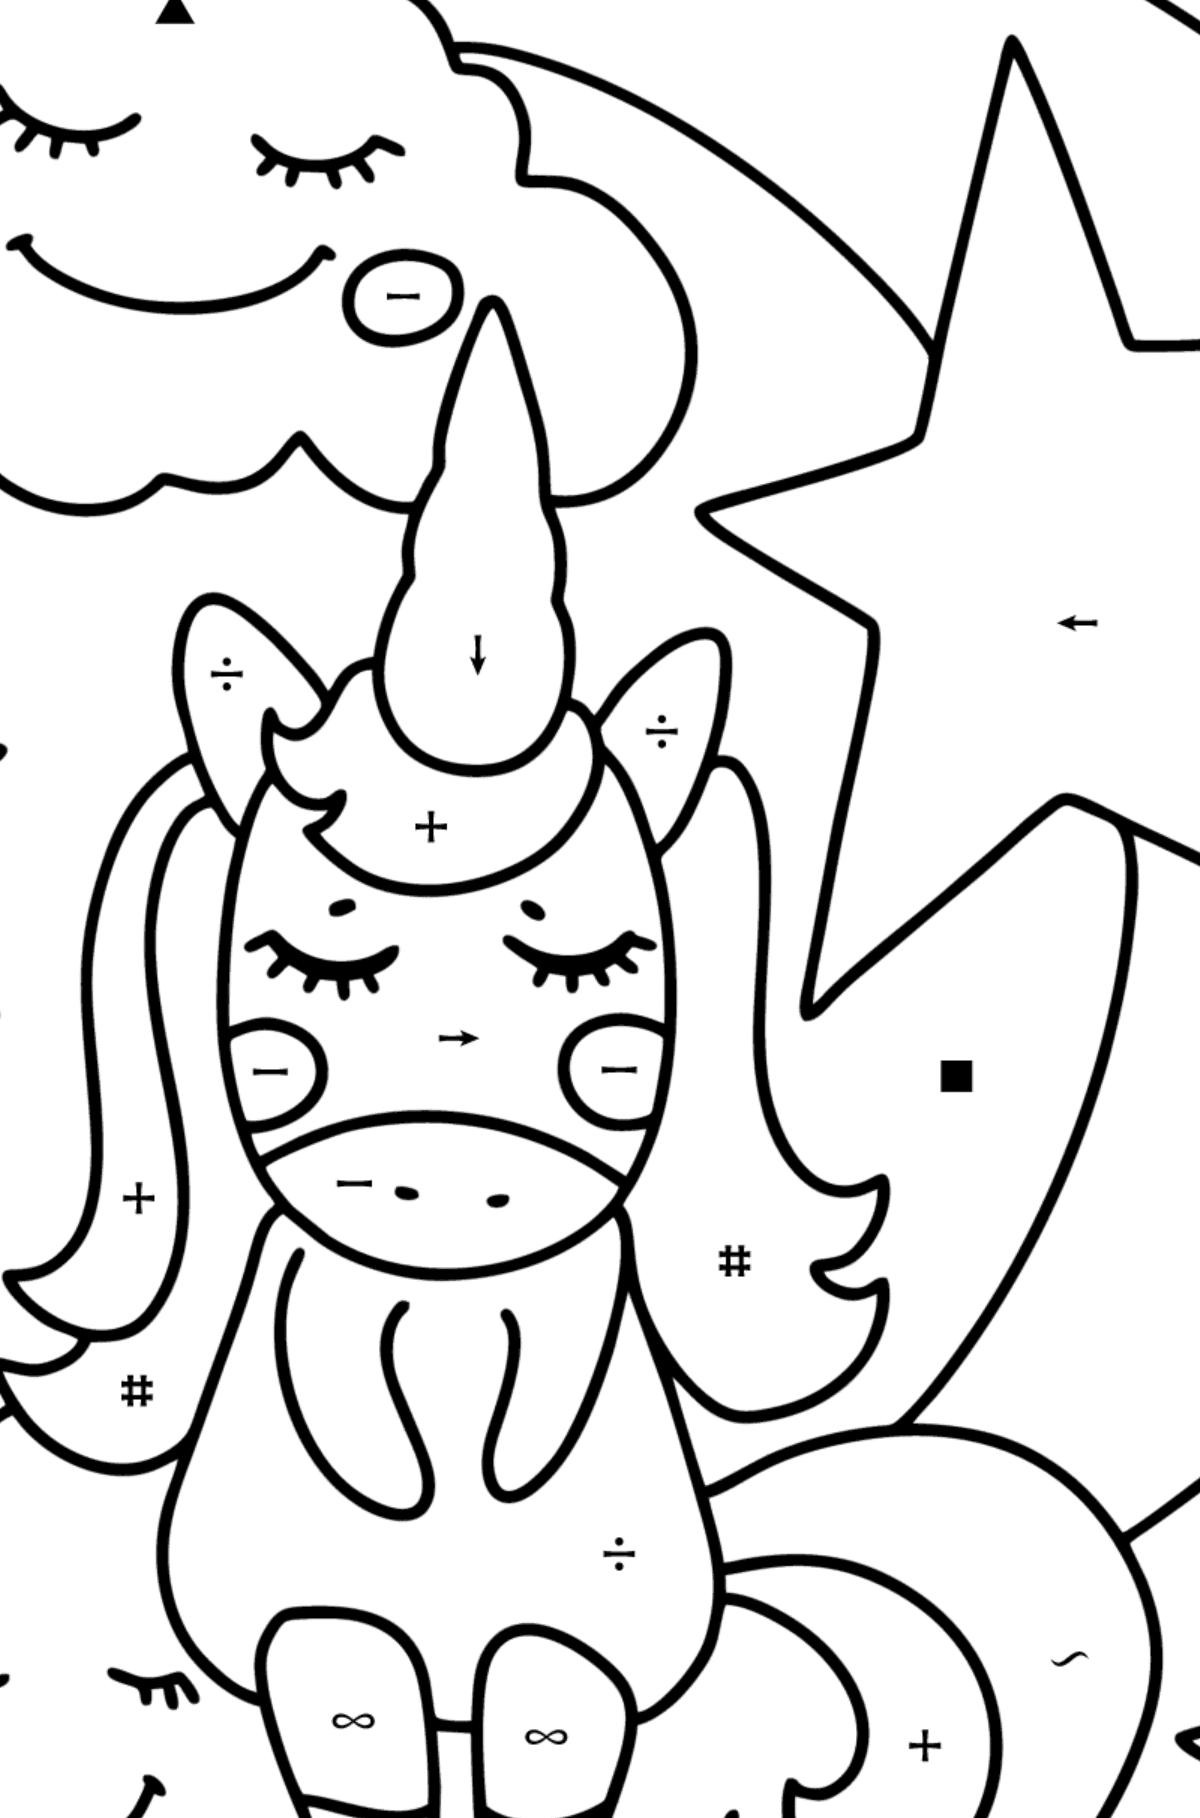 Star unicorn coloring page - Coloring by Symbols for Kids